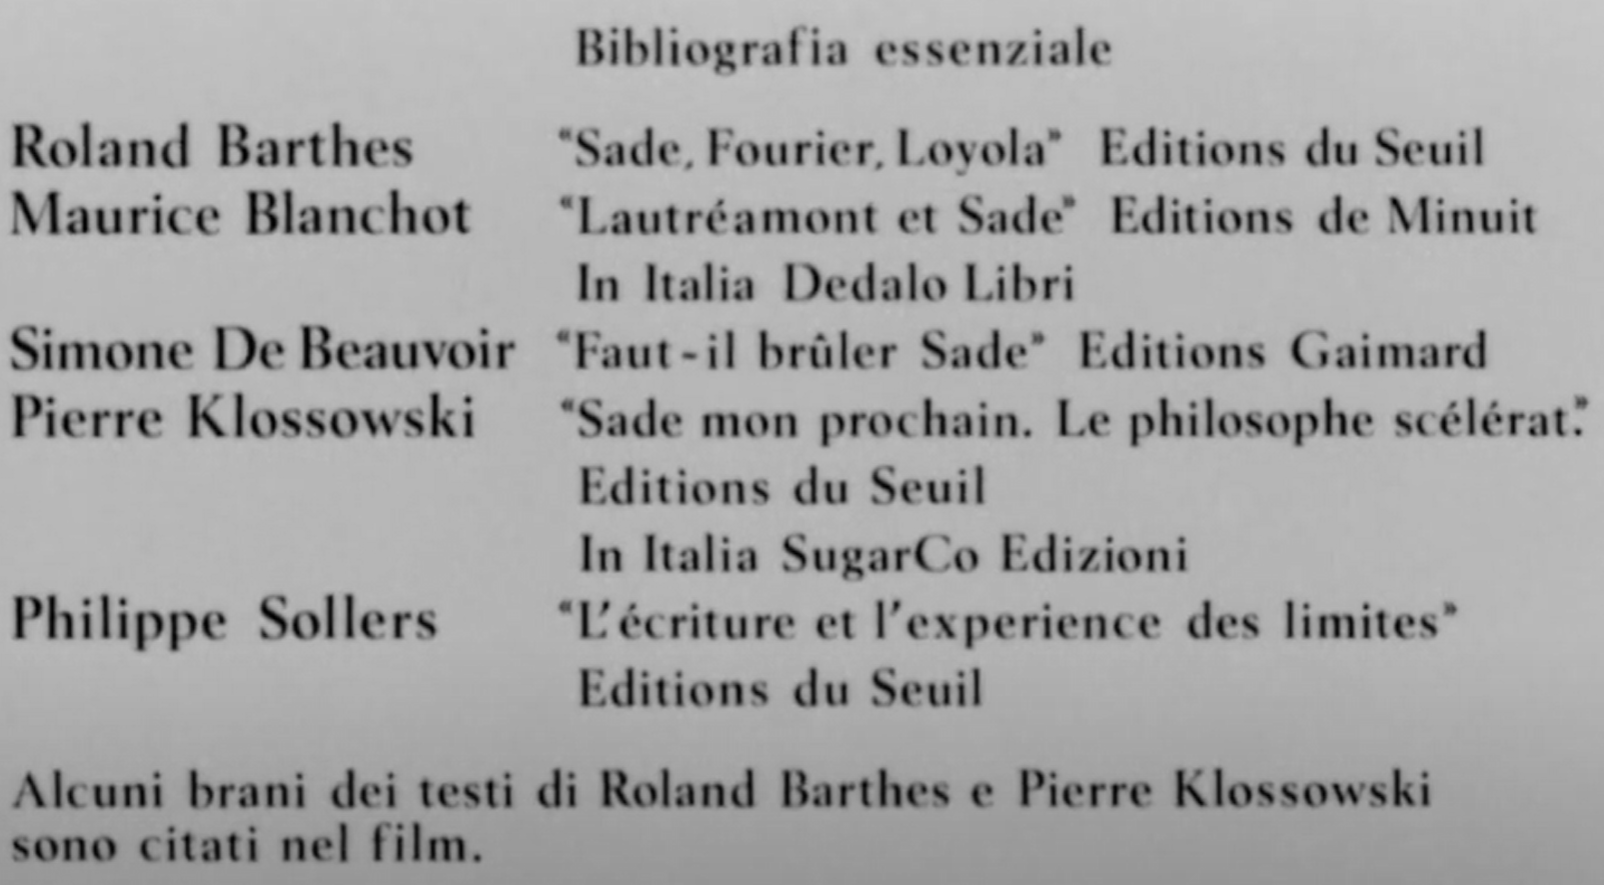 Pasolini's film opening credits with the bibliography of the following authors: Roland Barthes, Maurice Blanchot, Simone De Beauvoir, Pierre Klossowski and Philippe Sollers.